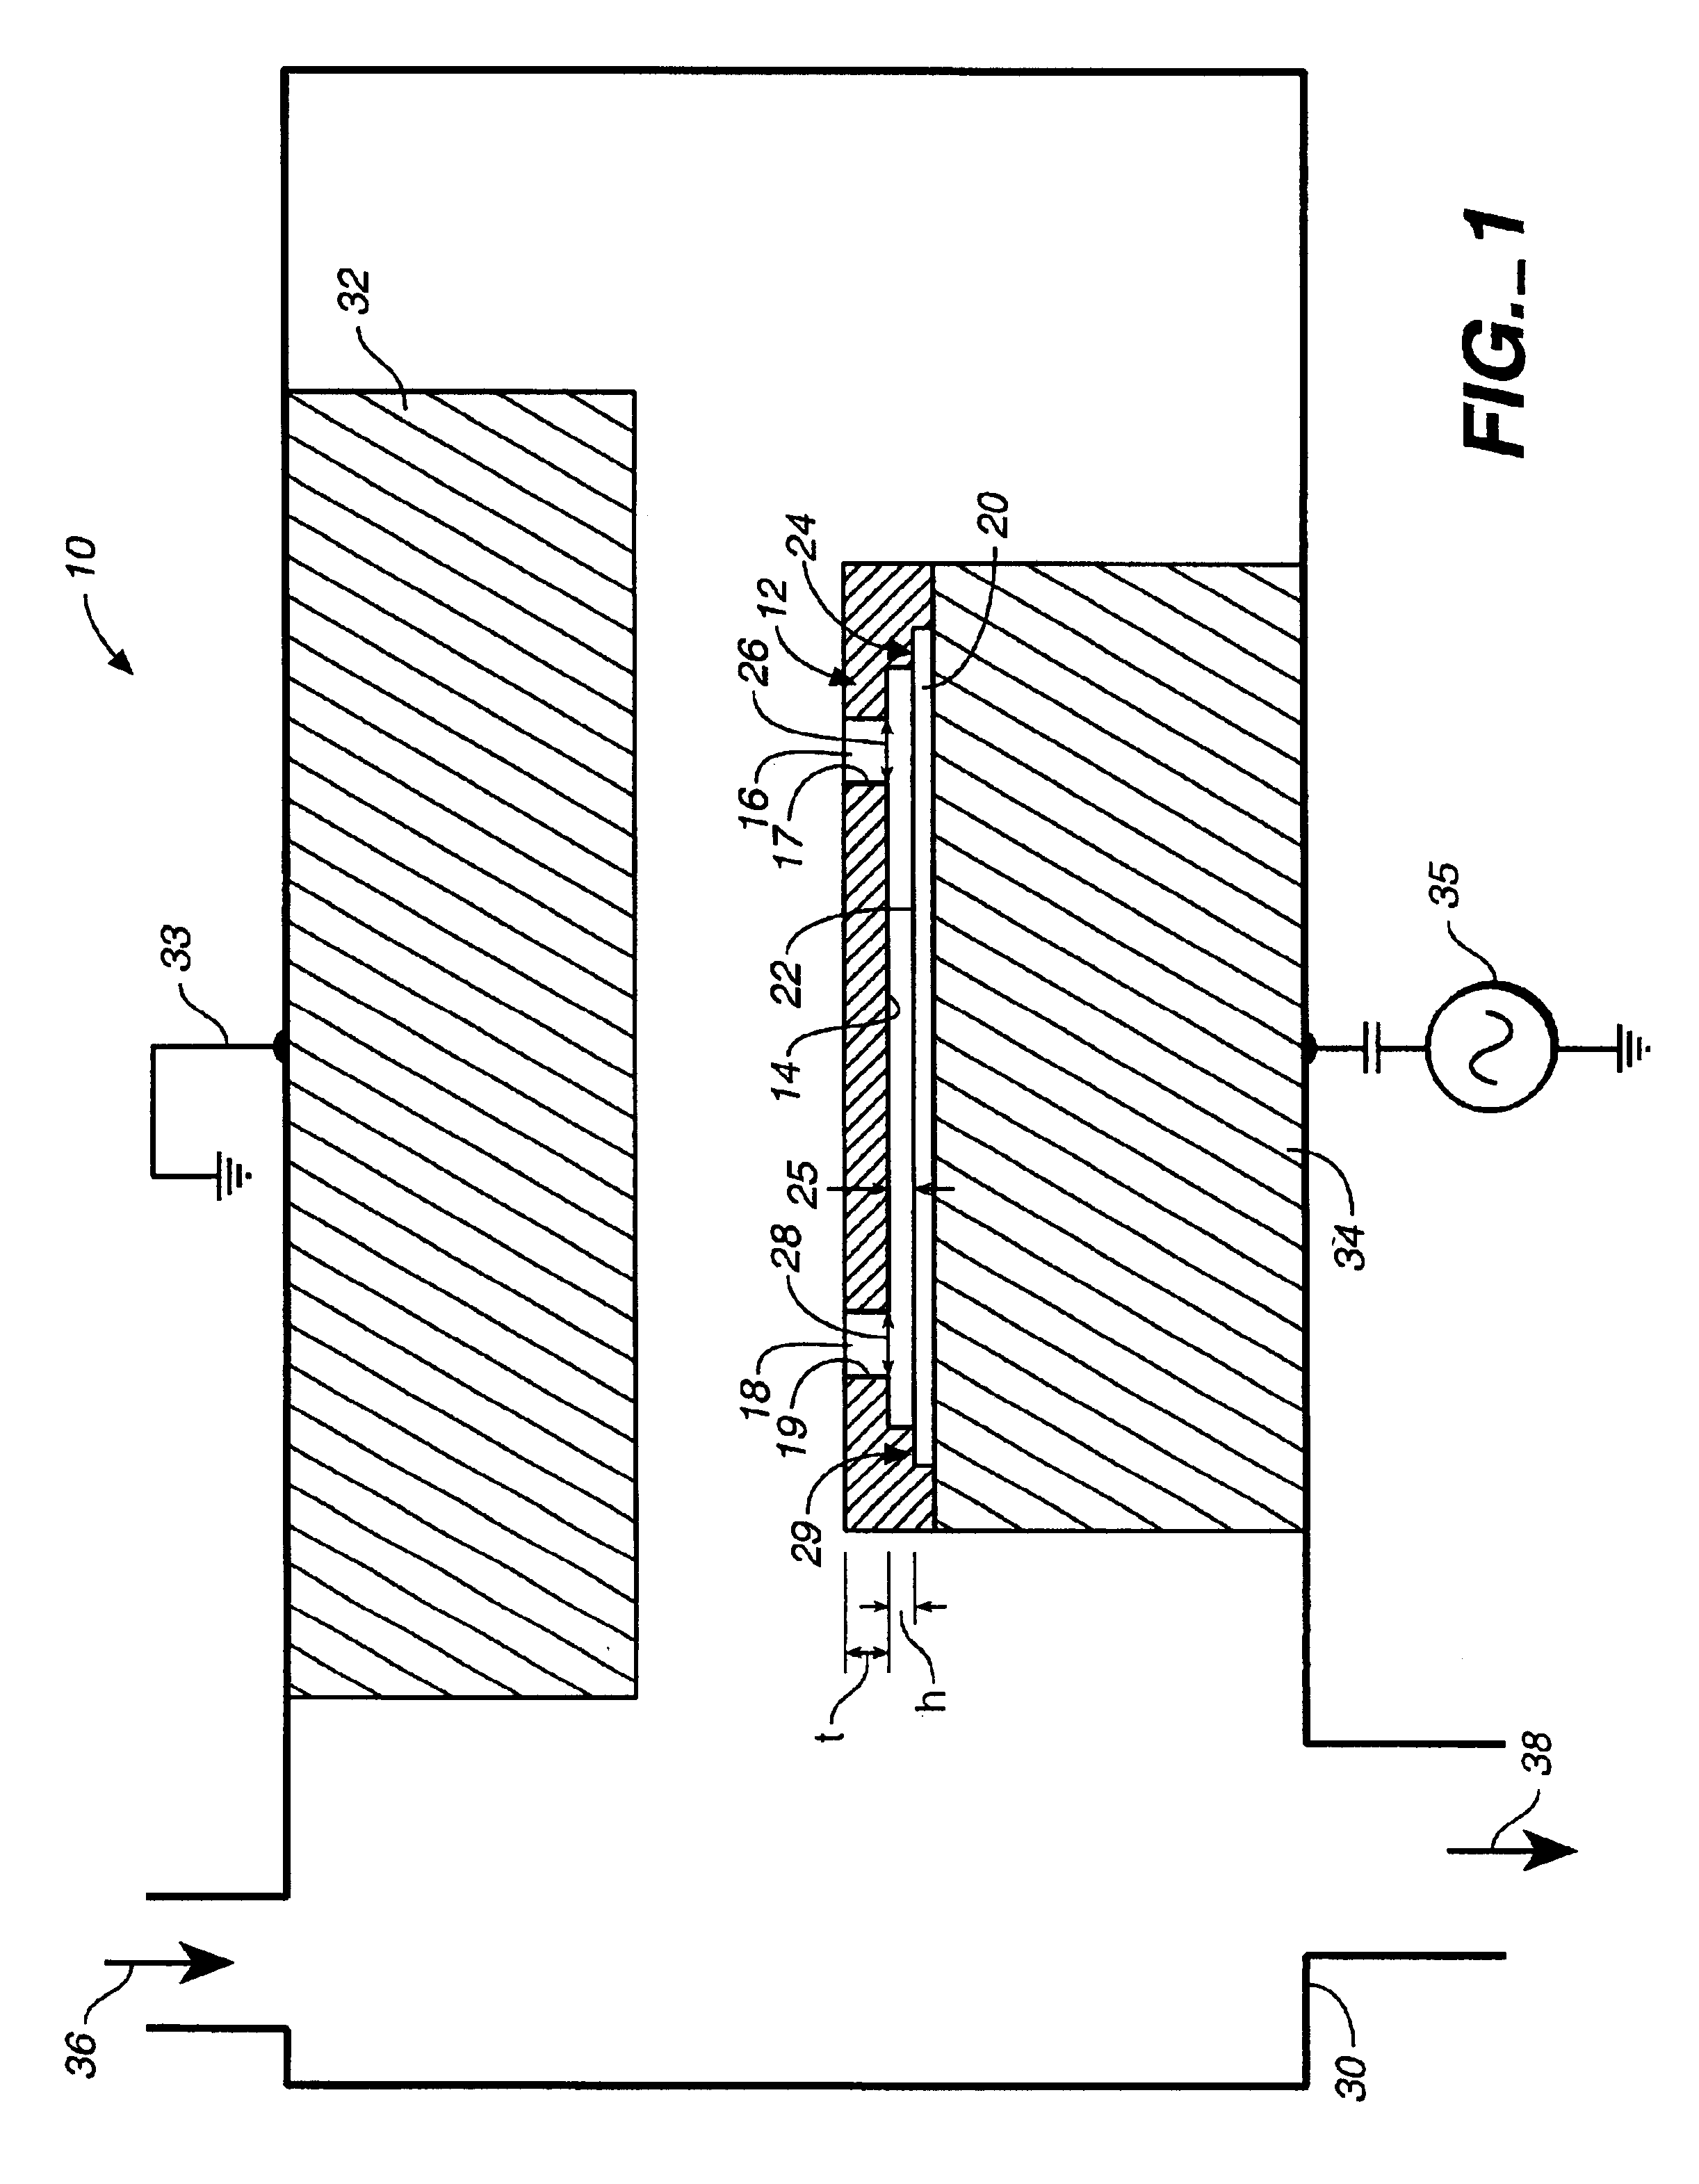 Confinement device for use in dry etching of substrate surface and method of dry etching a wafer surface